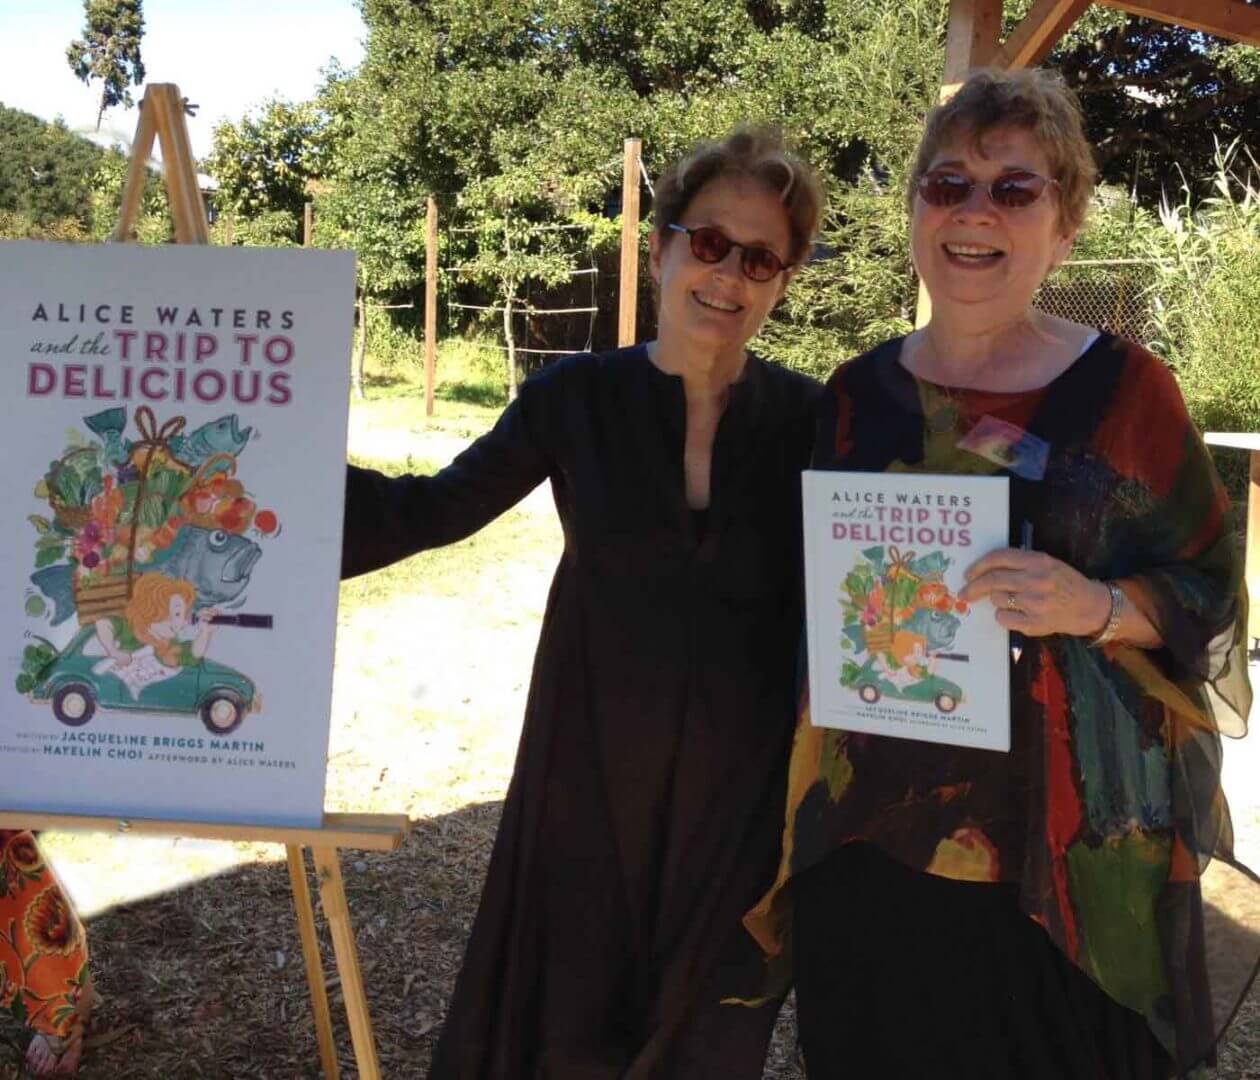 Alice Waters and the Trip to Delicious by Jacqueline Briggs Martin